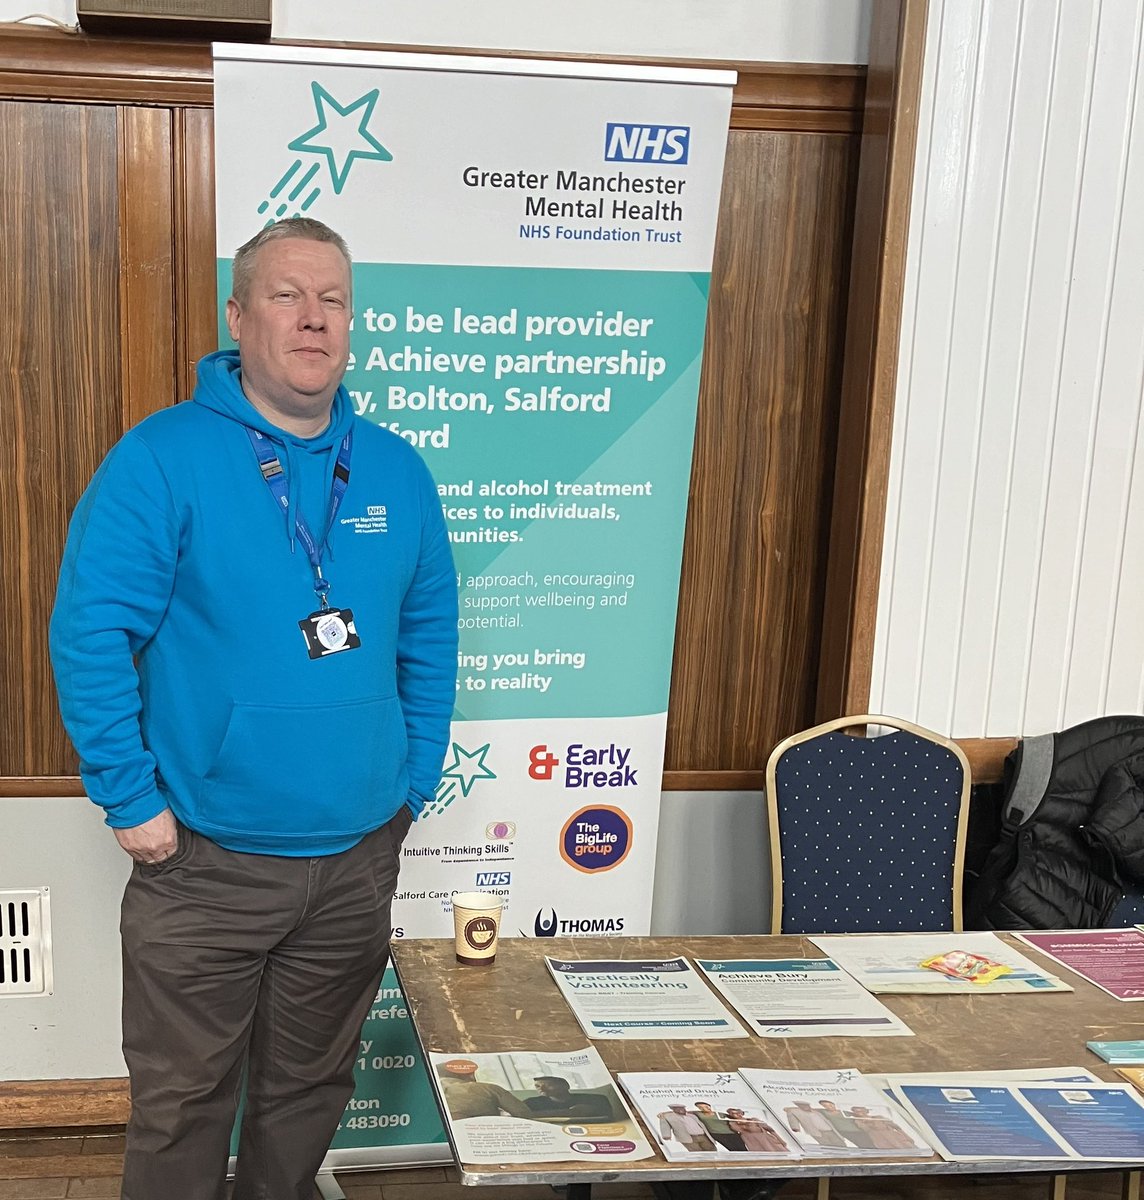 Achieve Bury are here with @EarlyBreakUK and the Achieve Assertive Outreach Team @BigLifeTweets at Bury Town Hall for the Bury Children’s Services Fair. Information and conversations about treatment, recovery, harm reduction and more. If you’re nearby come and see us.